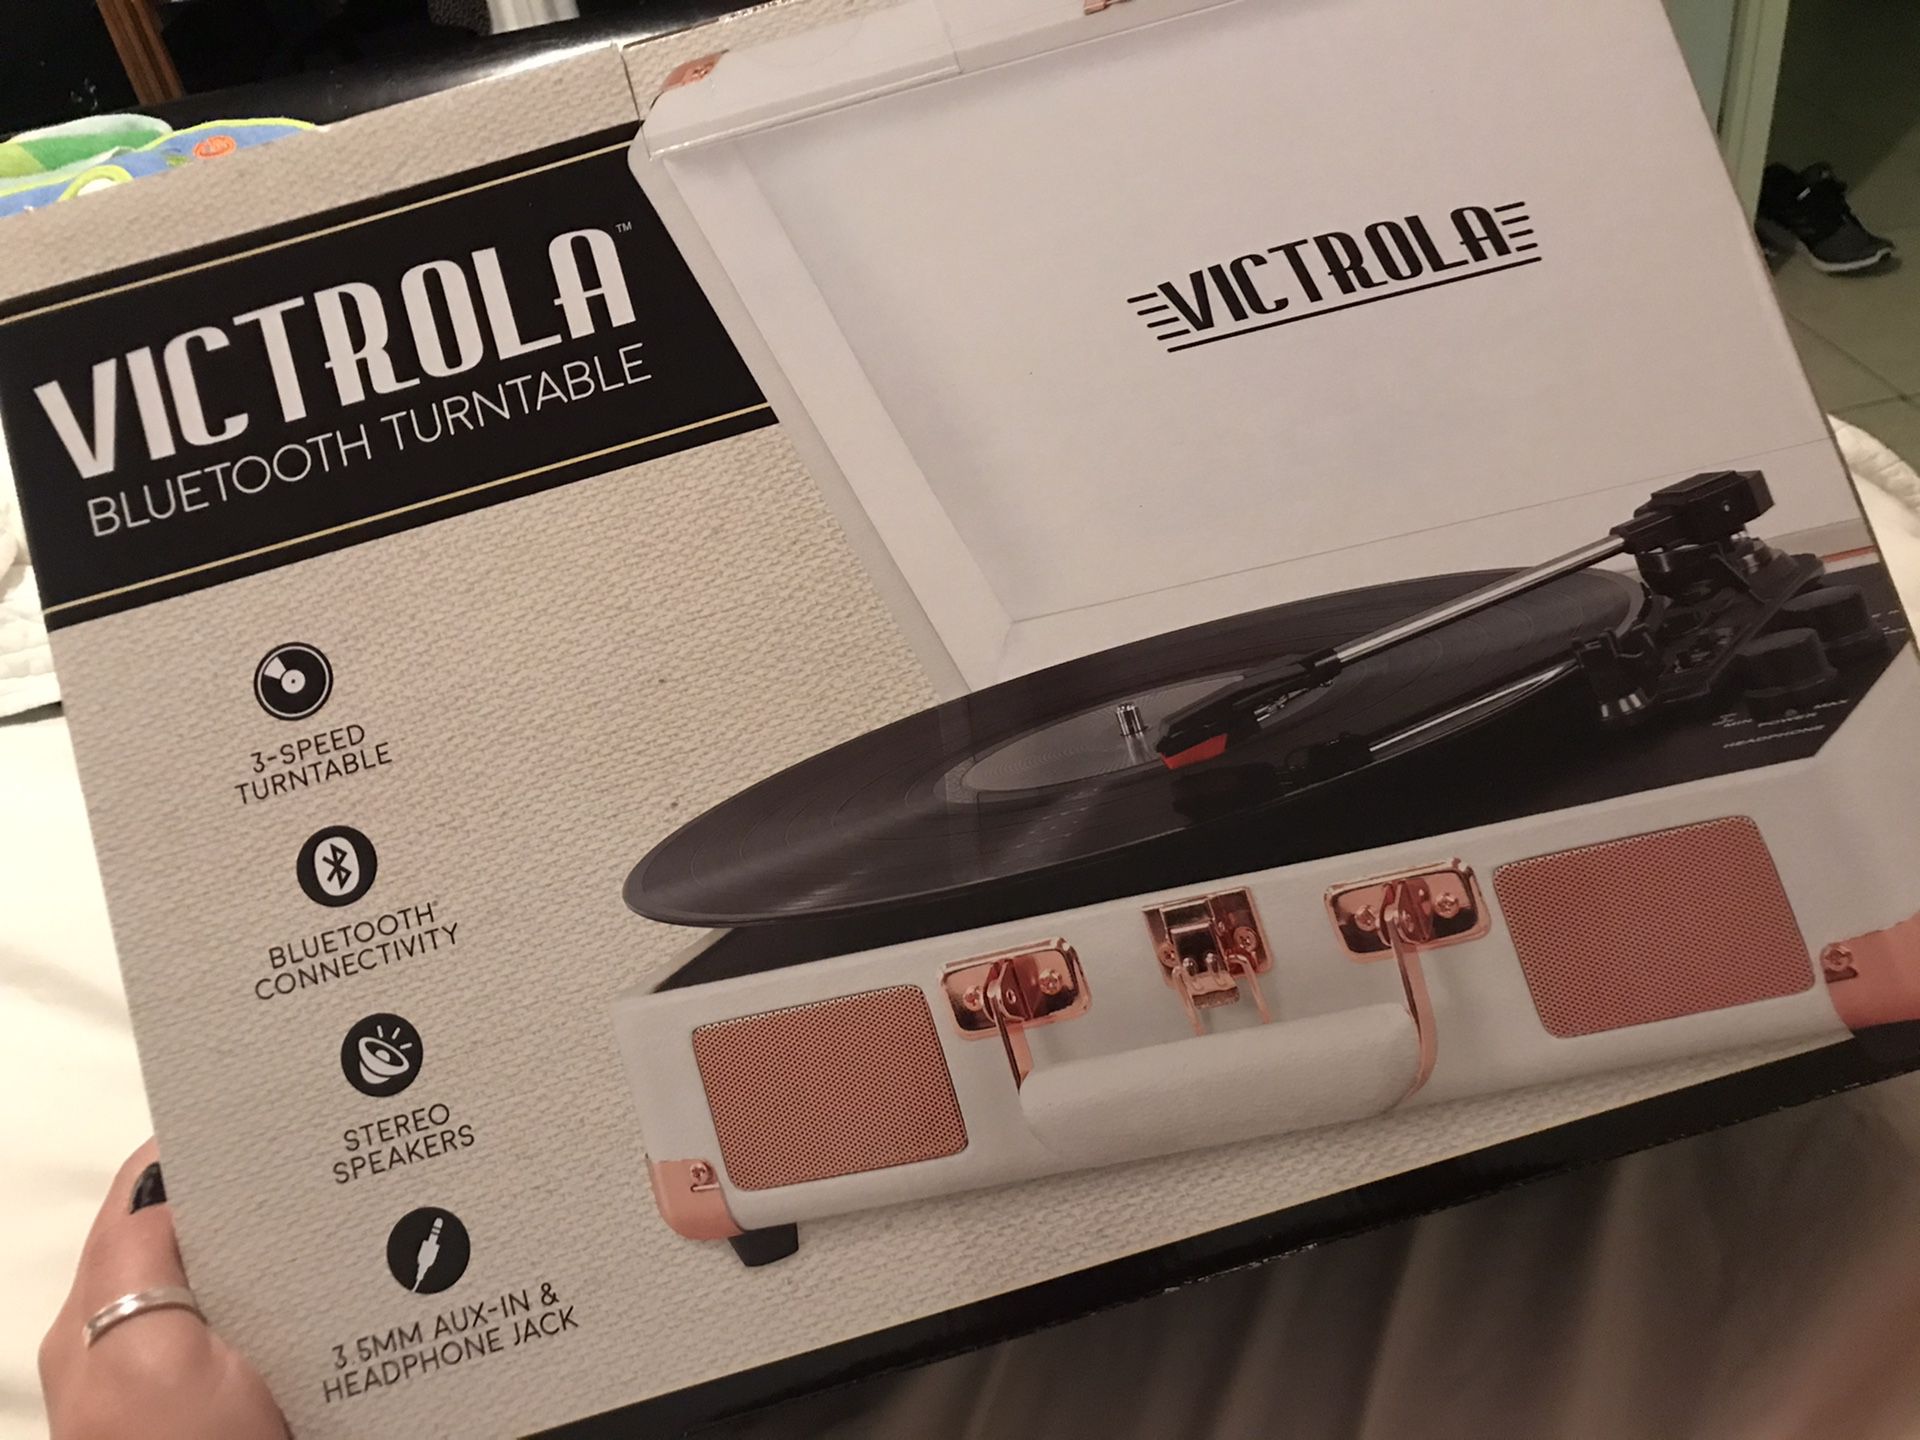 Victrola Bluetooth turntable with KHALID record!! New!